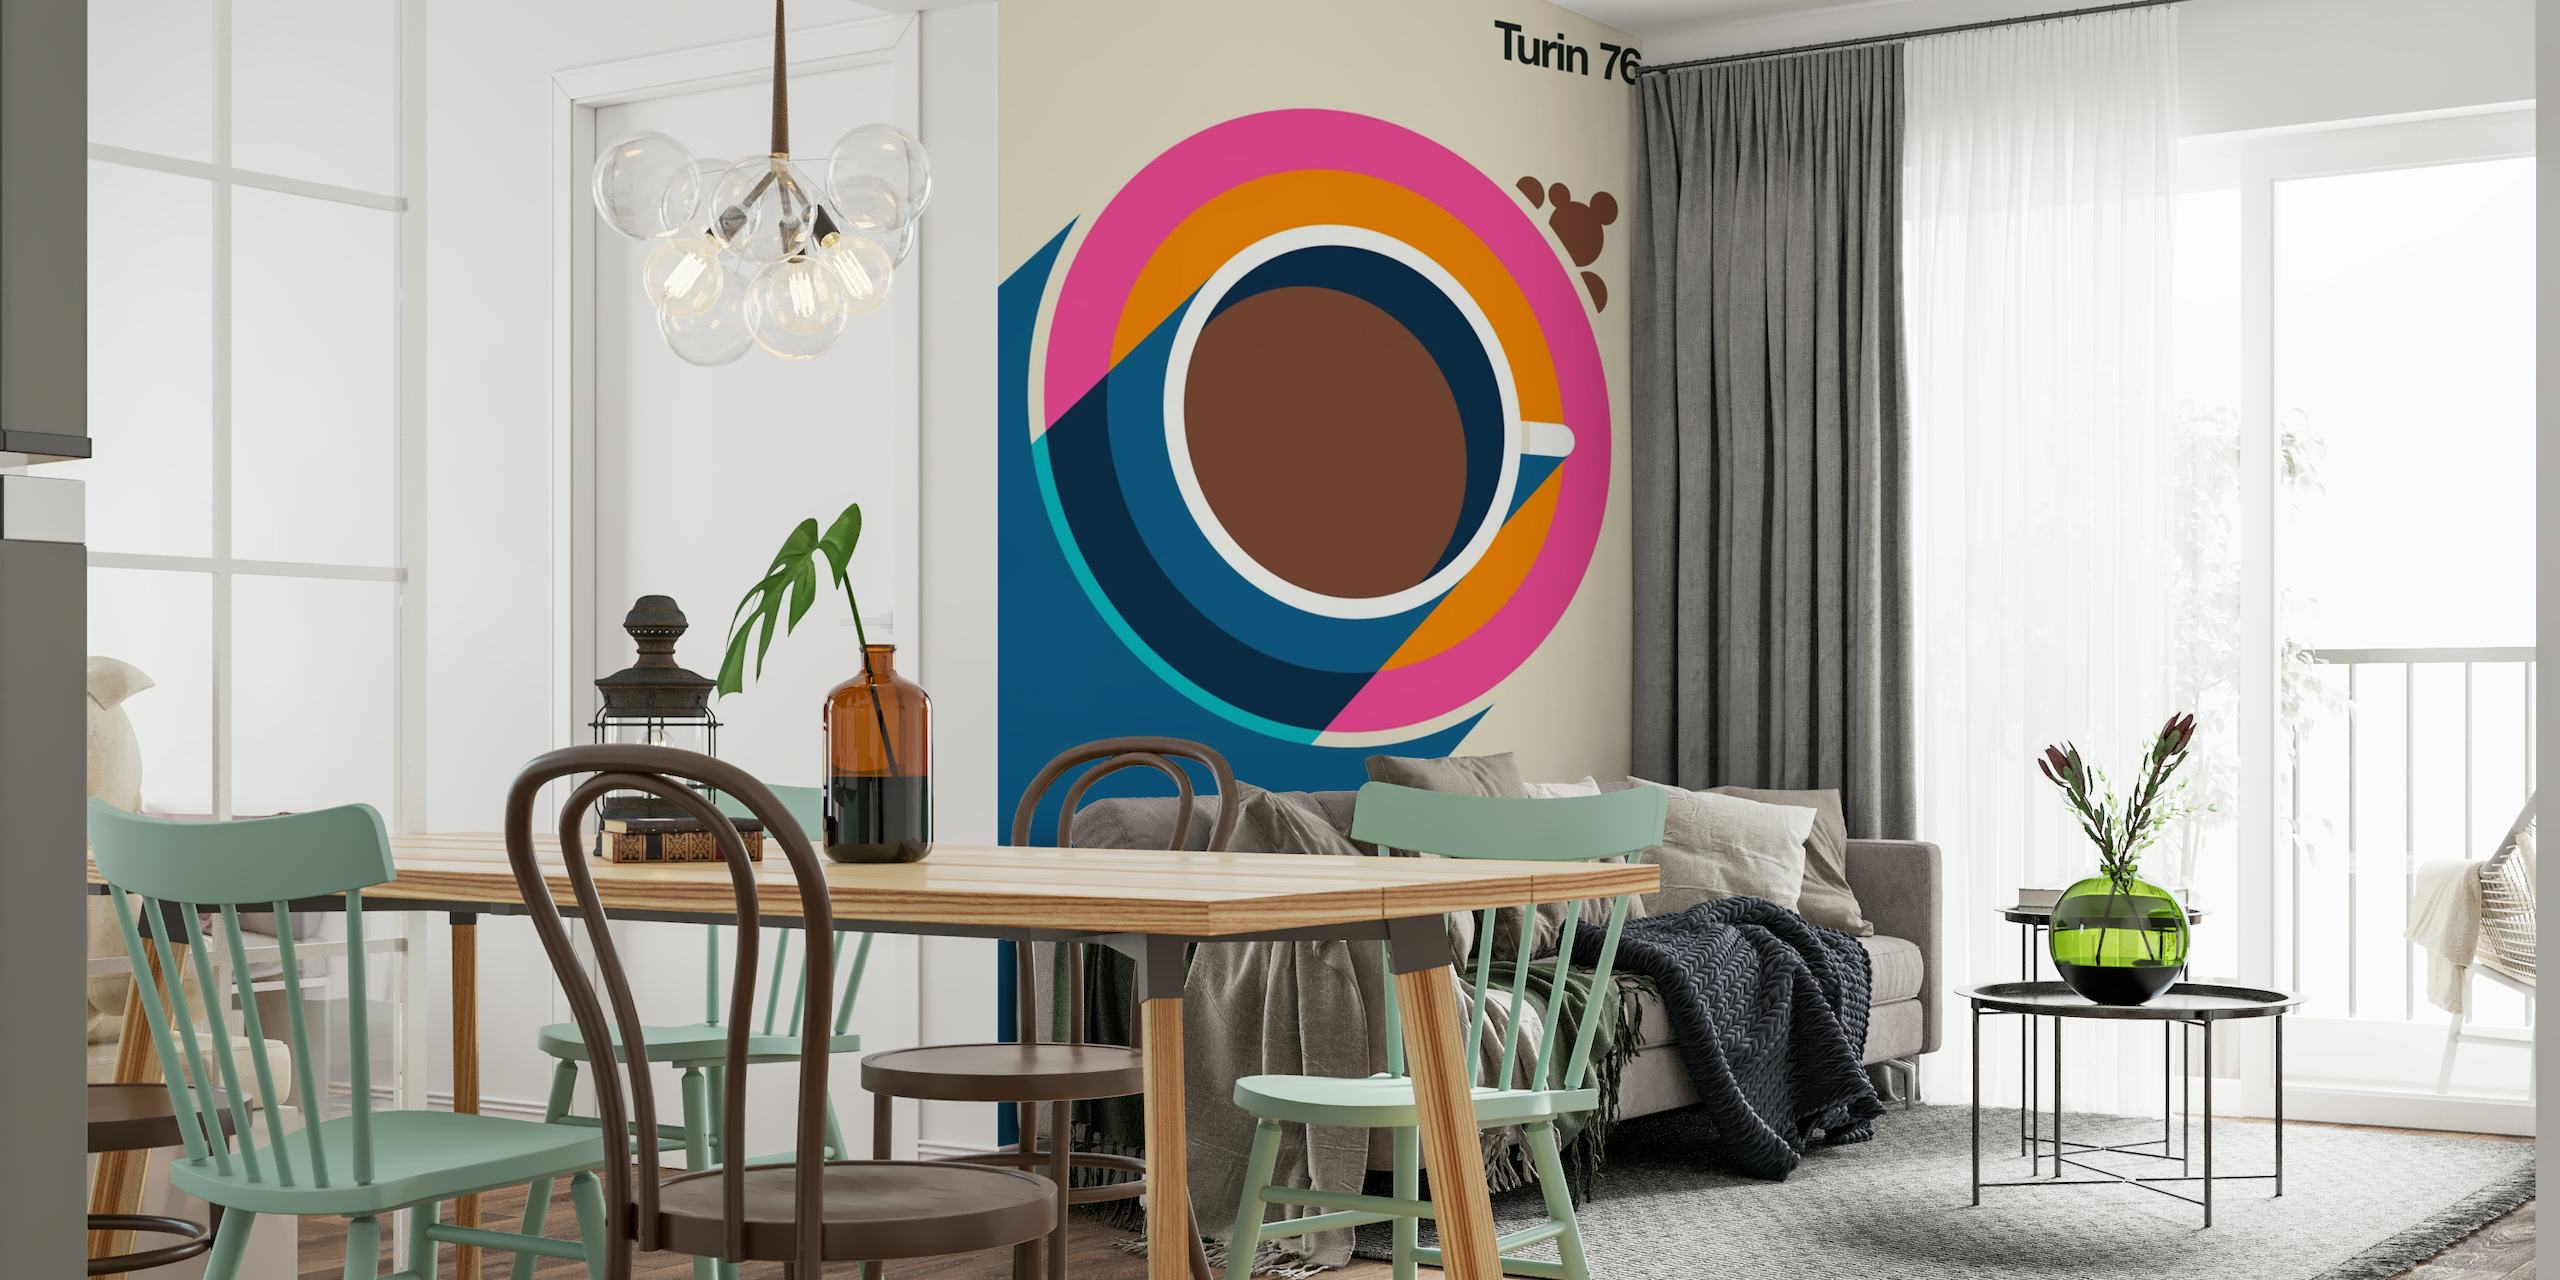 Stylized retro coffee cup wall mural from Turin 76 collection